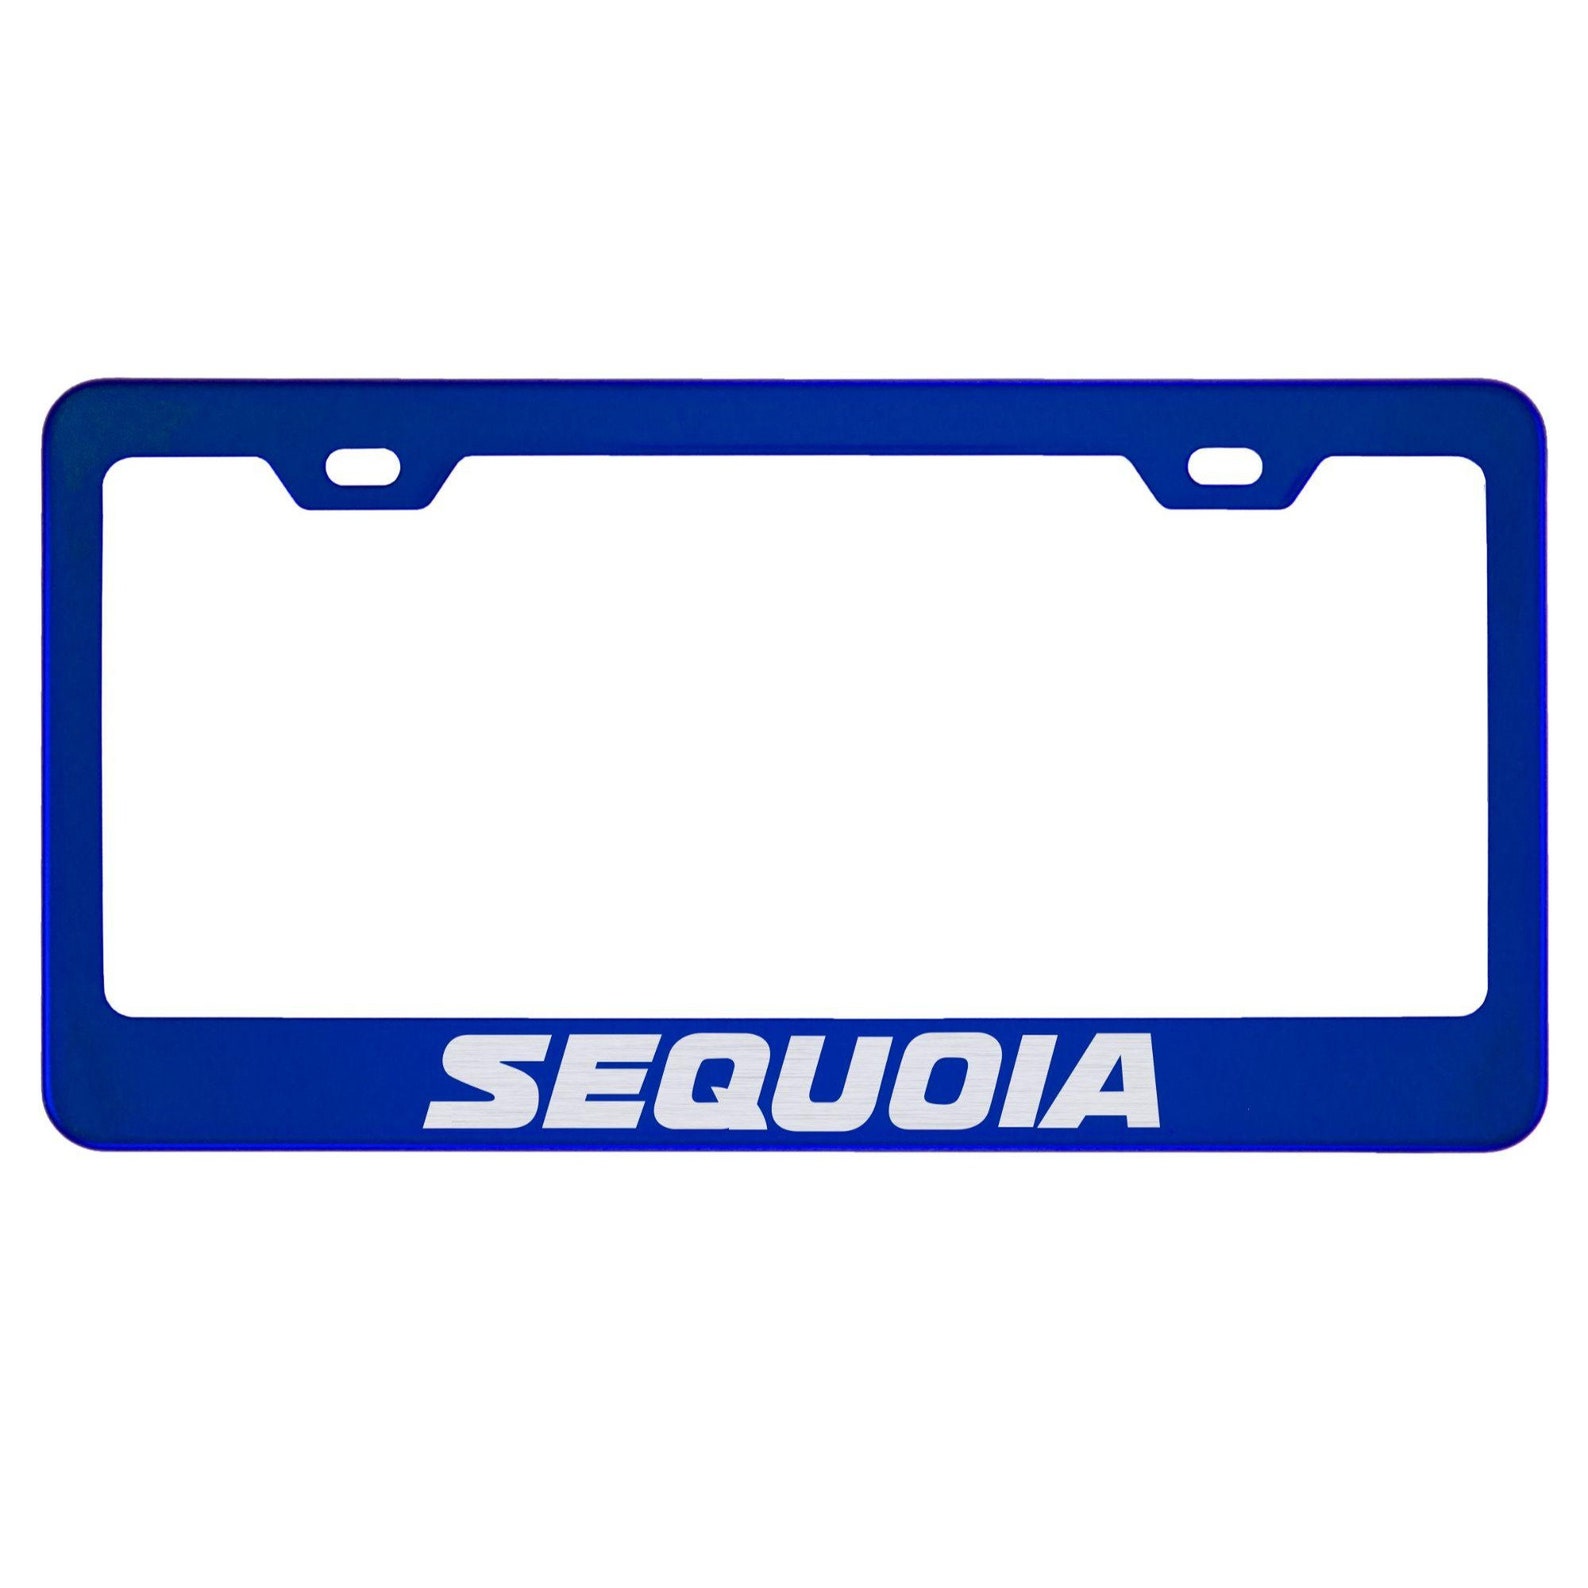 Toyota Sequoia Blue License Plate Frame Etsy